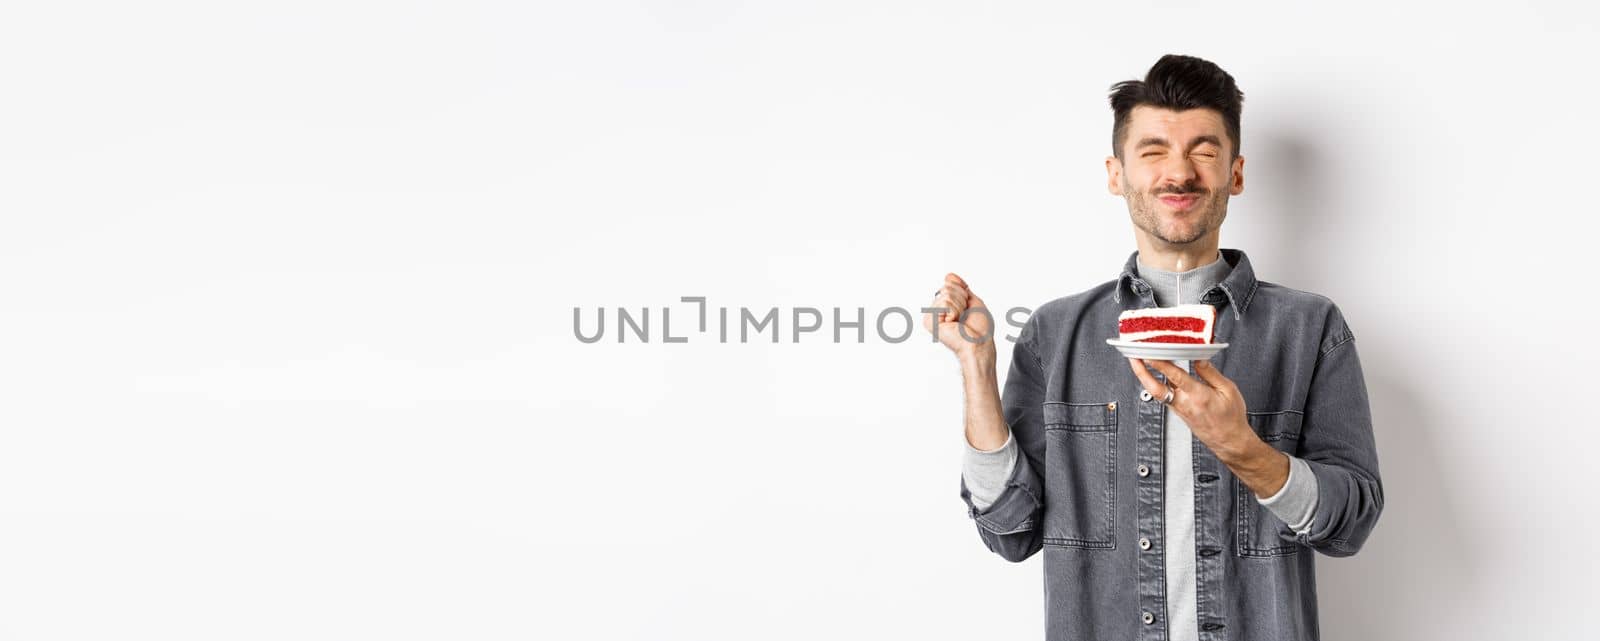 Happy birthday guy making wish on cake with candle, celebrating bday, standing on white background by Benzoix